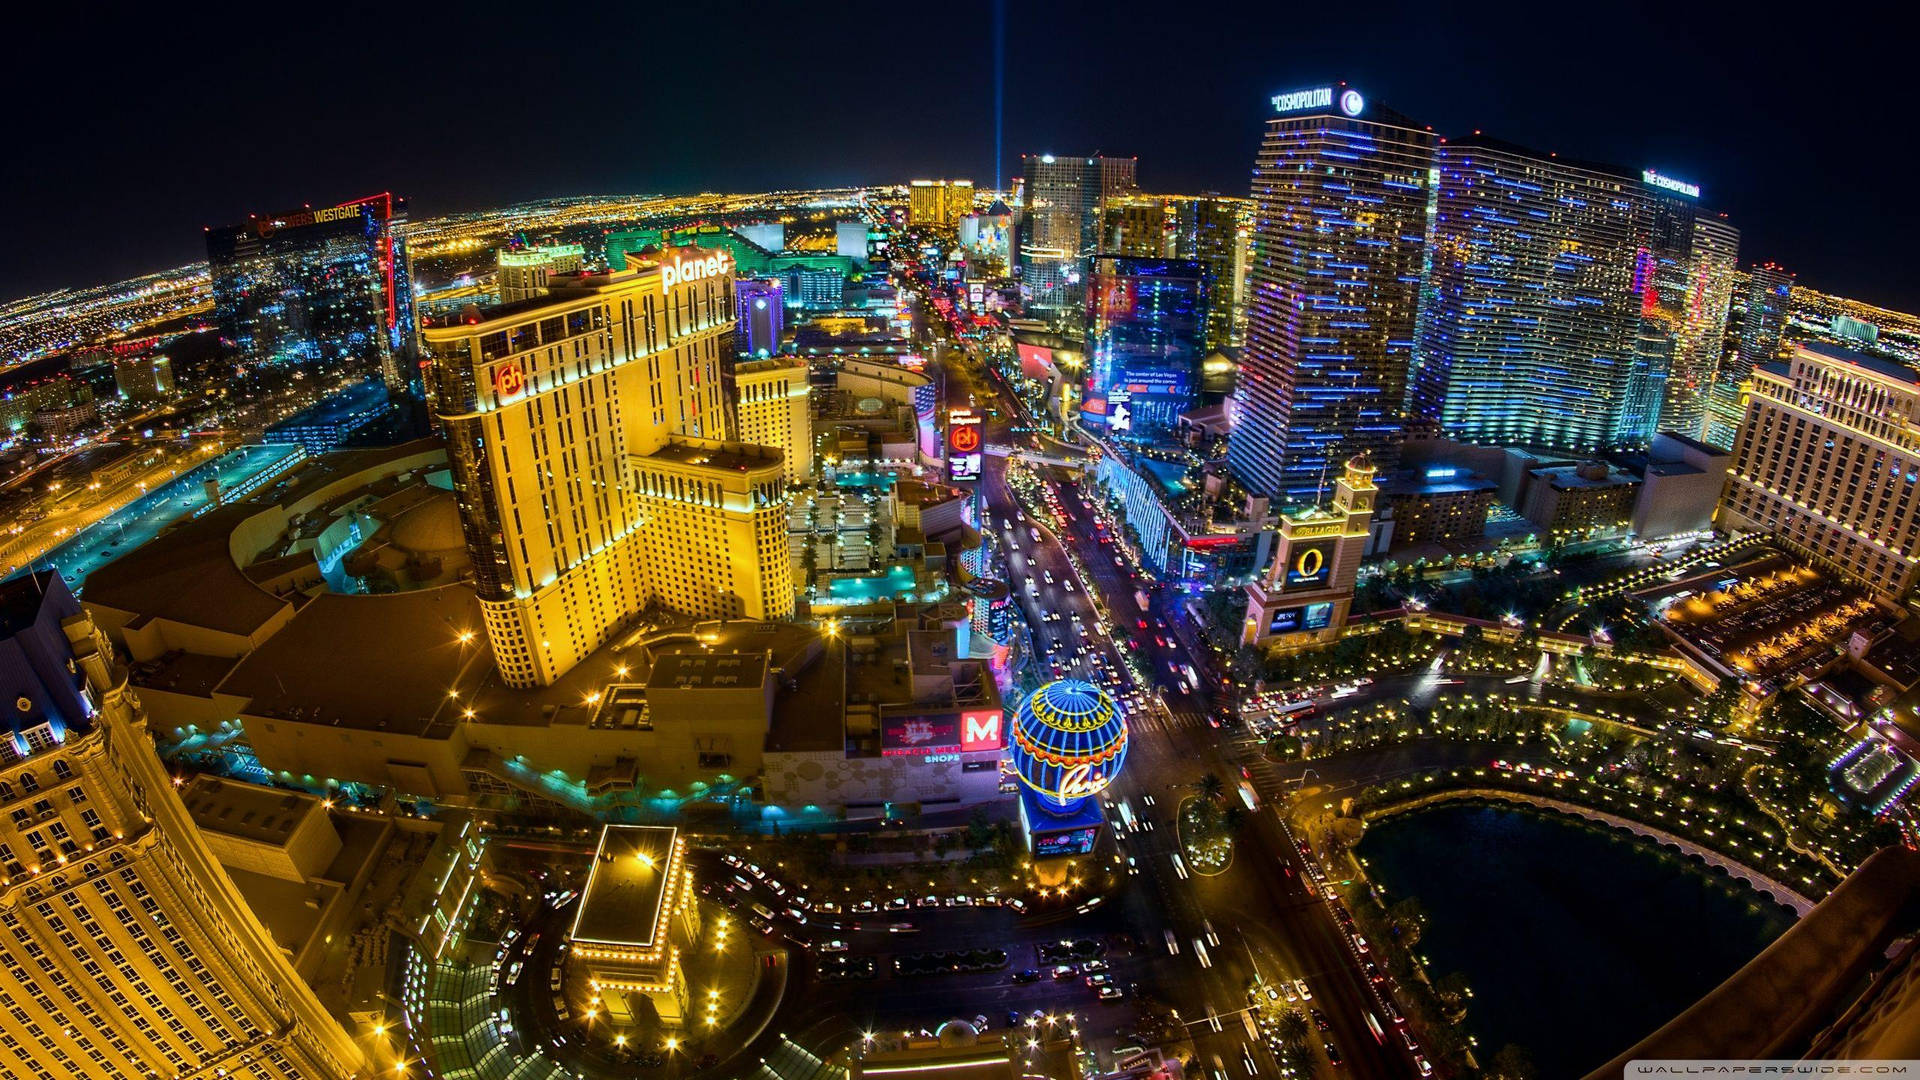 Video Of A City View Of The Strip At Night Background, Picture Of Las Vegas  Background Image And Wallpaper for Free Download